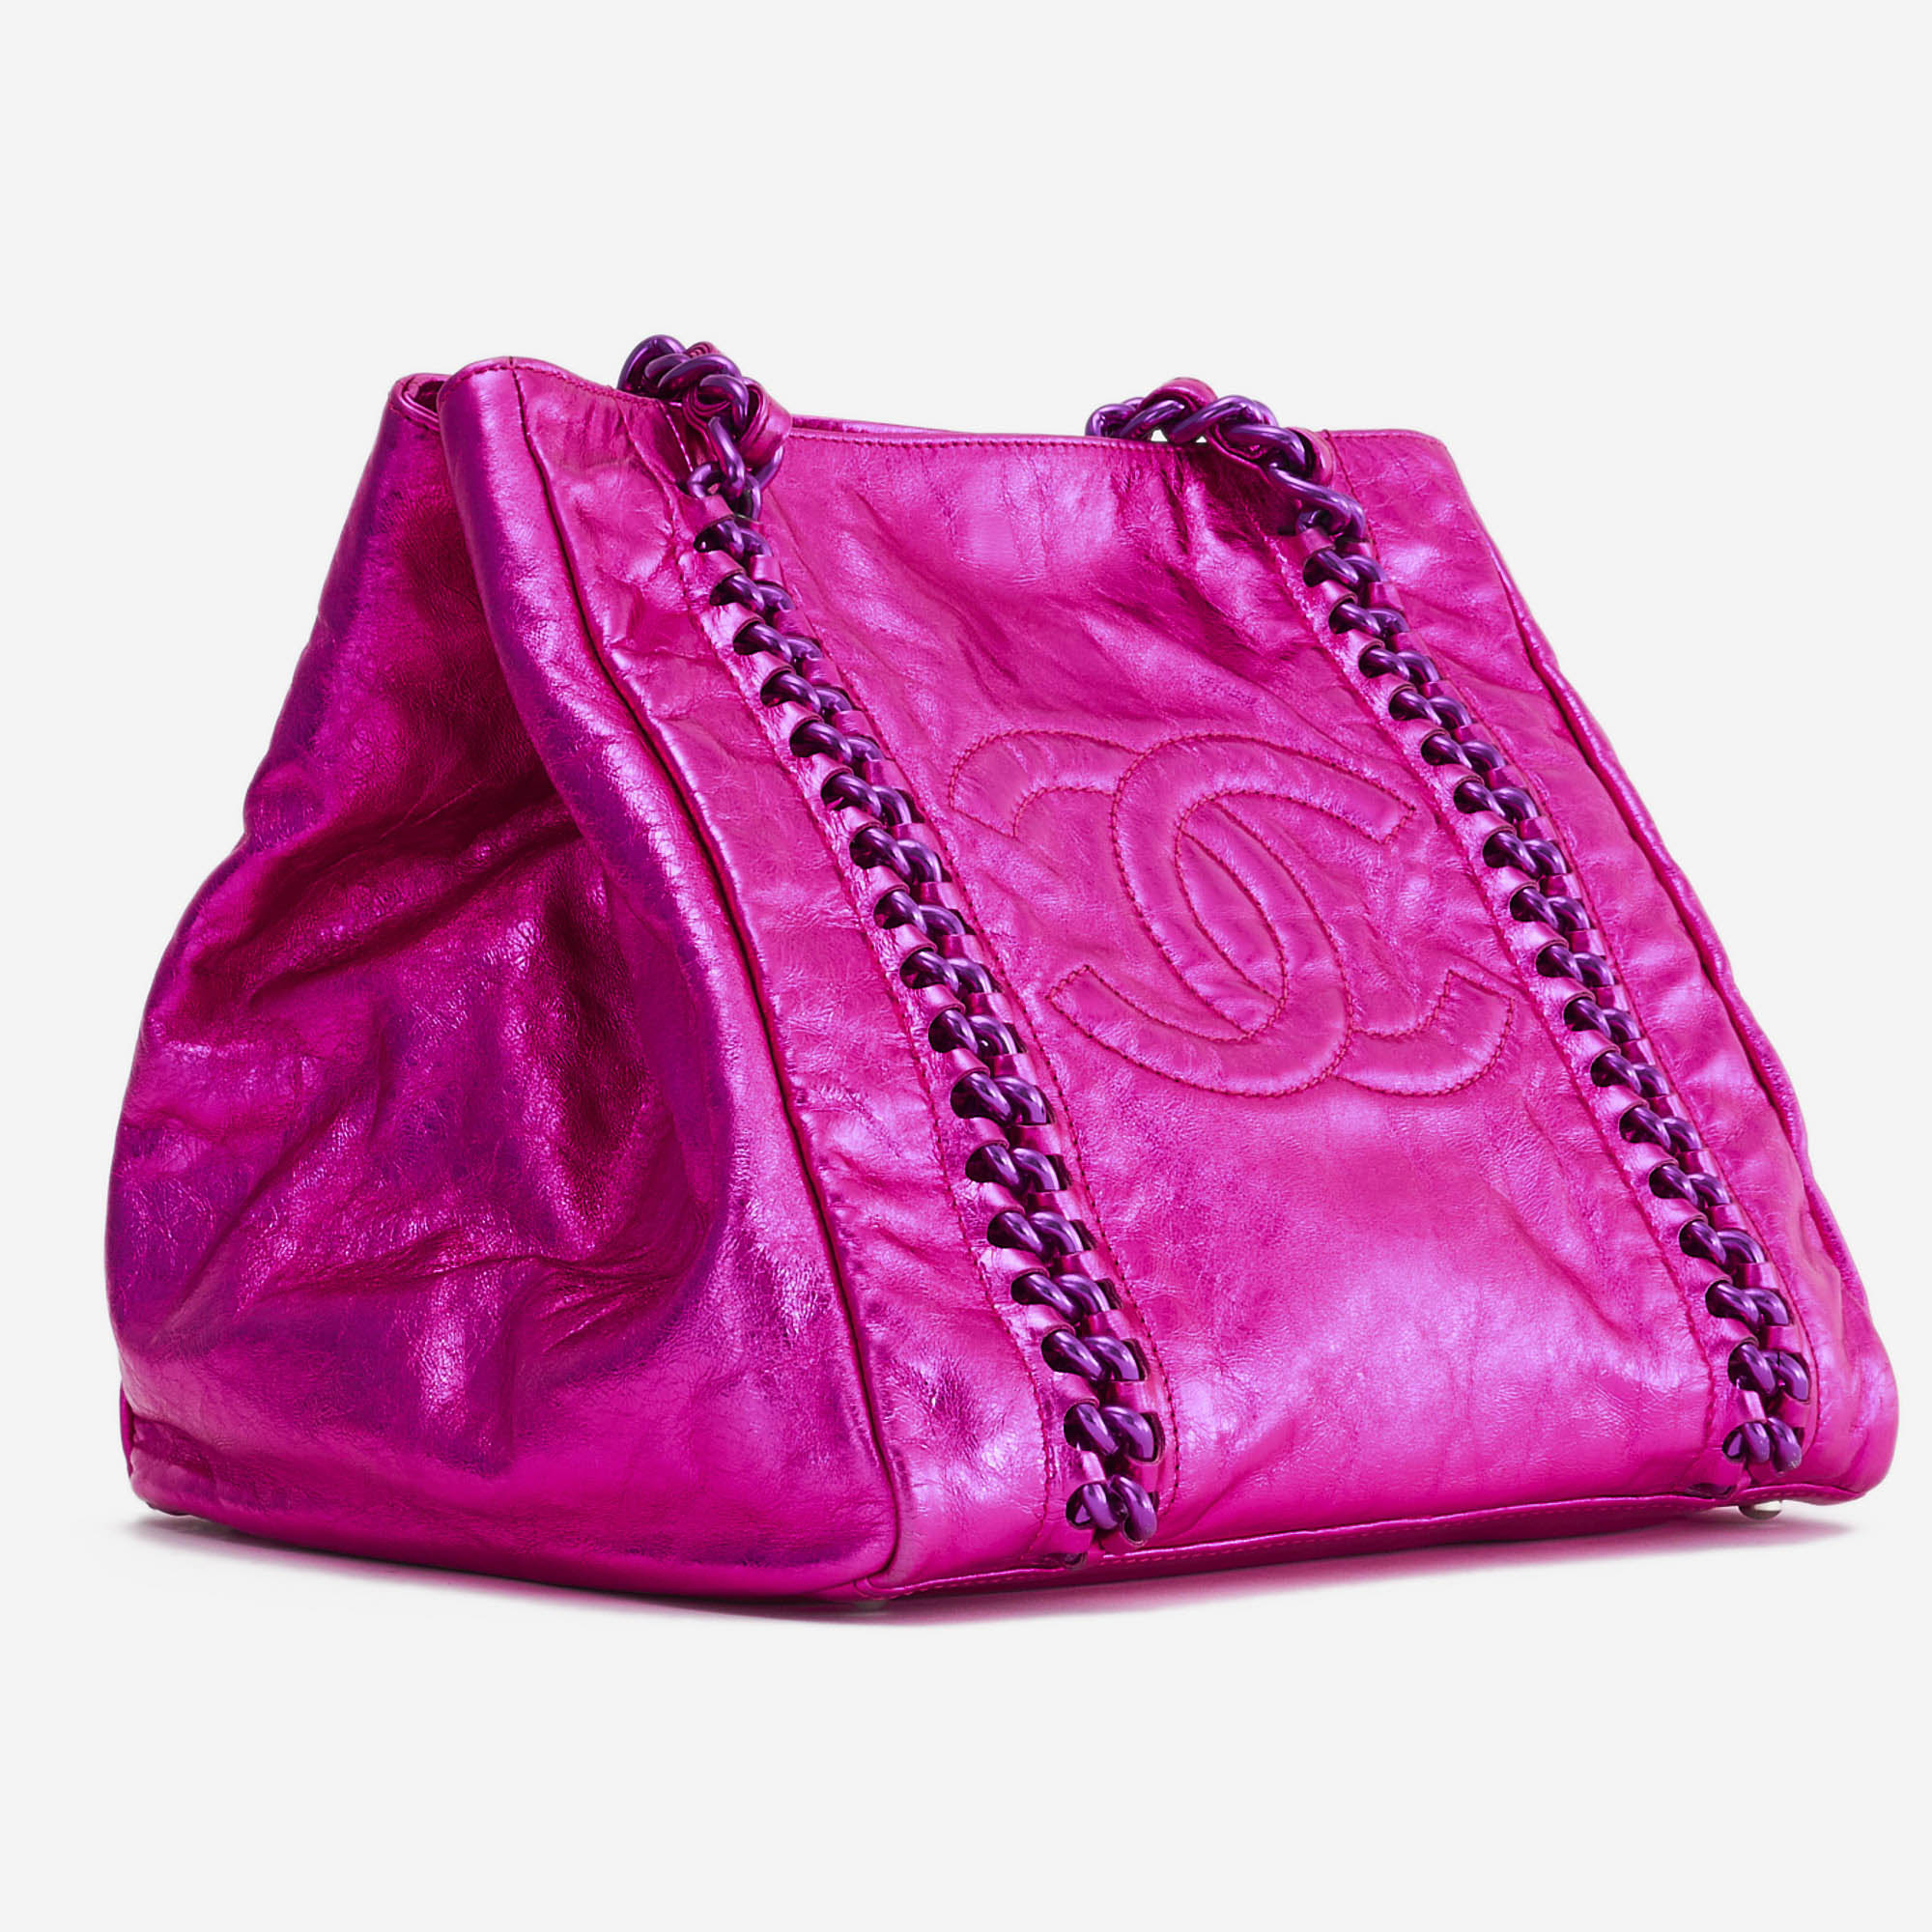 Want It Wednesday Chanel Flap Bag in Pink Cloudy Pearly Goatskin   PurseBlog